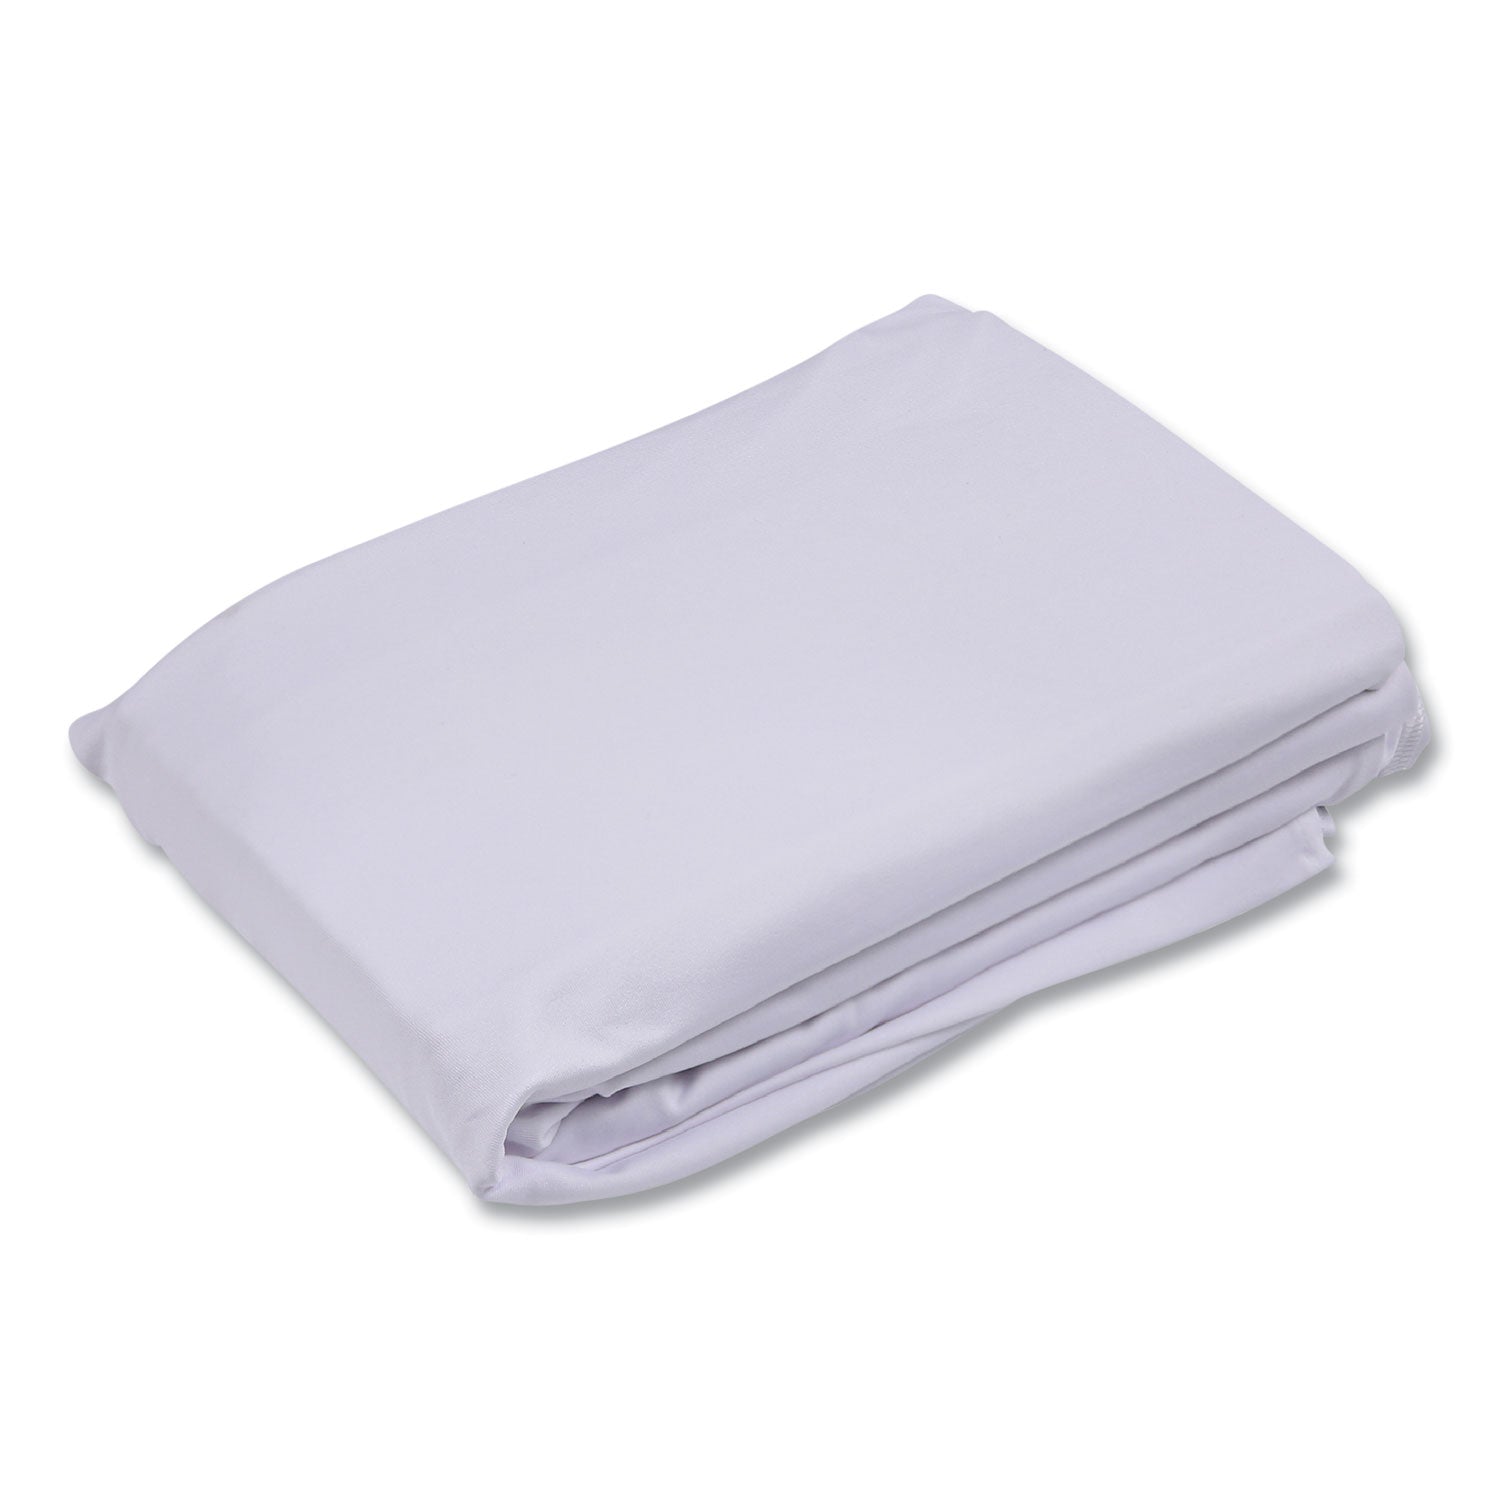 igear-fabric-table-cover-polyester-30-x-96-white_ice16533 - 2